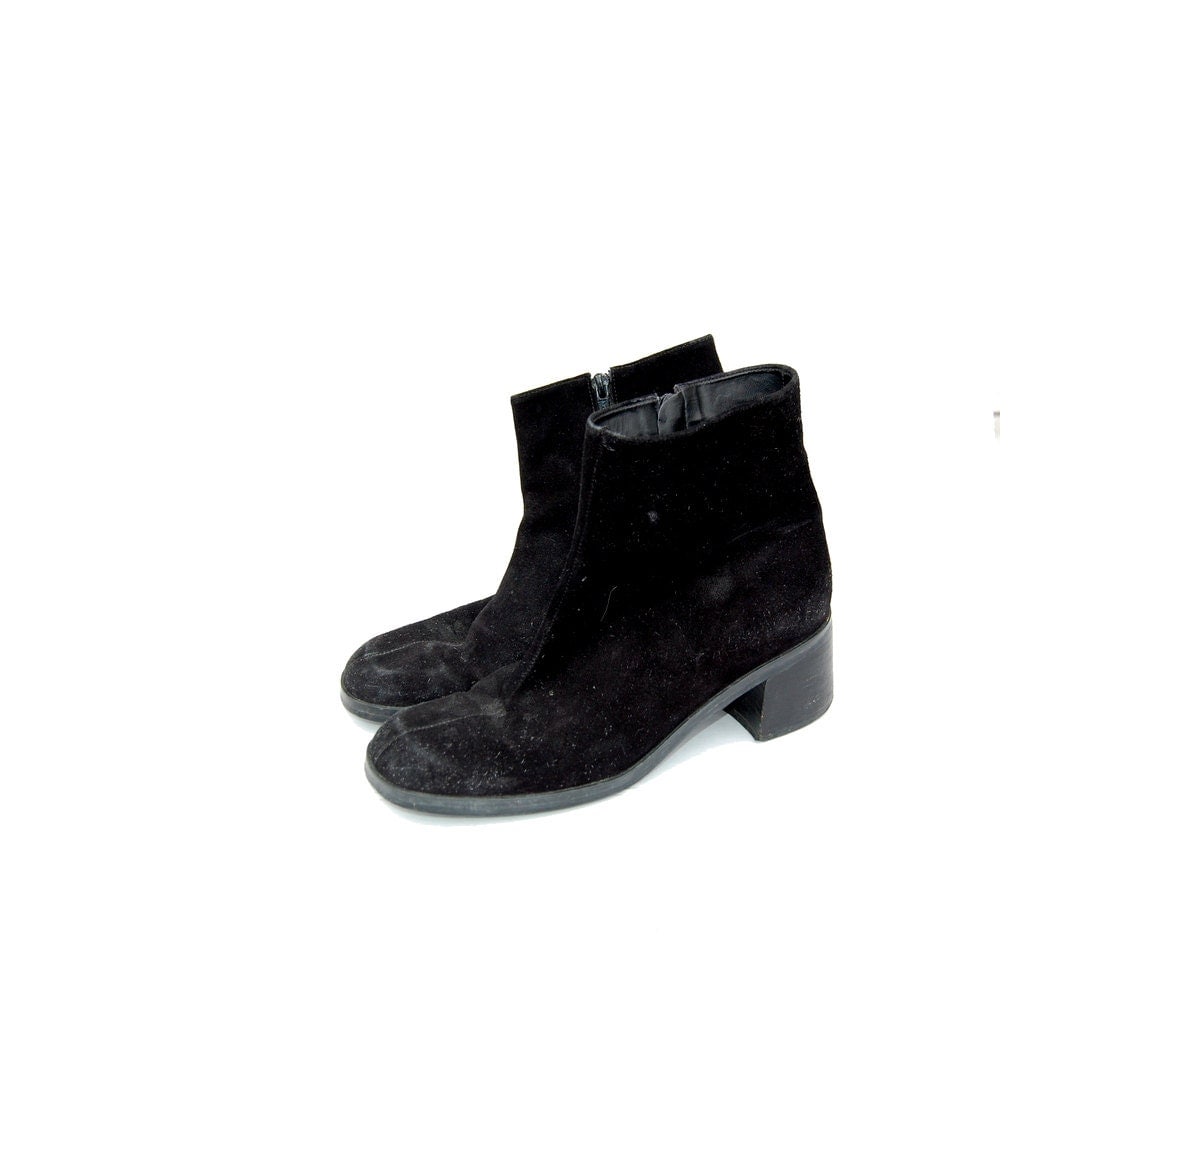 SALE Chunky black suede Nine West chelsea boots 1990s